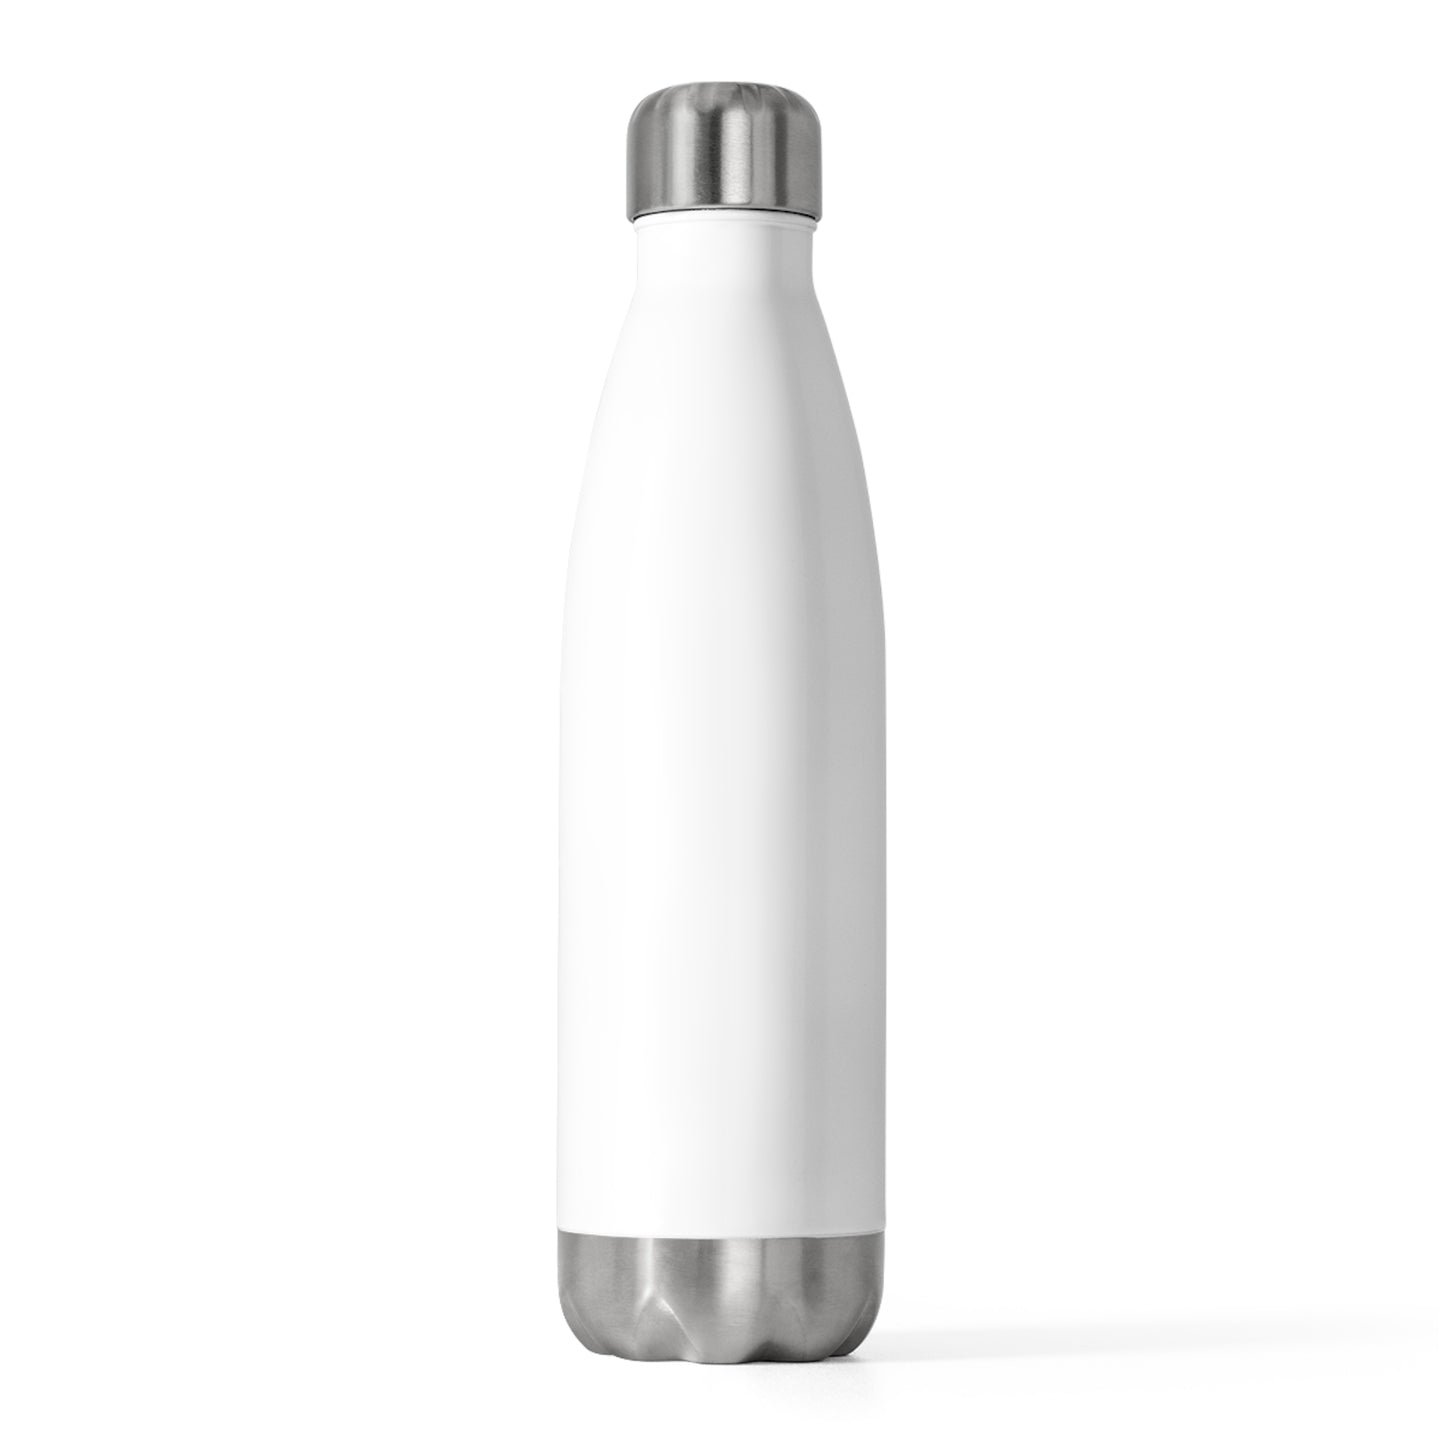 I Walk By Faith Not By Sight (2) Insulated Bottle 20 oz